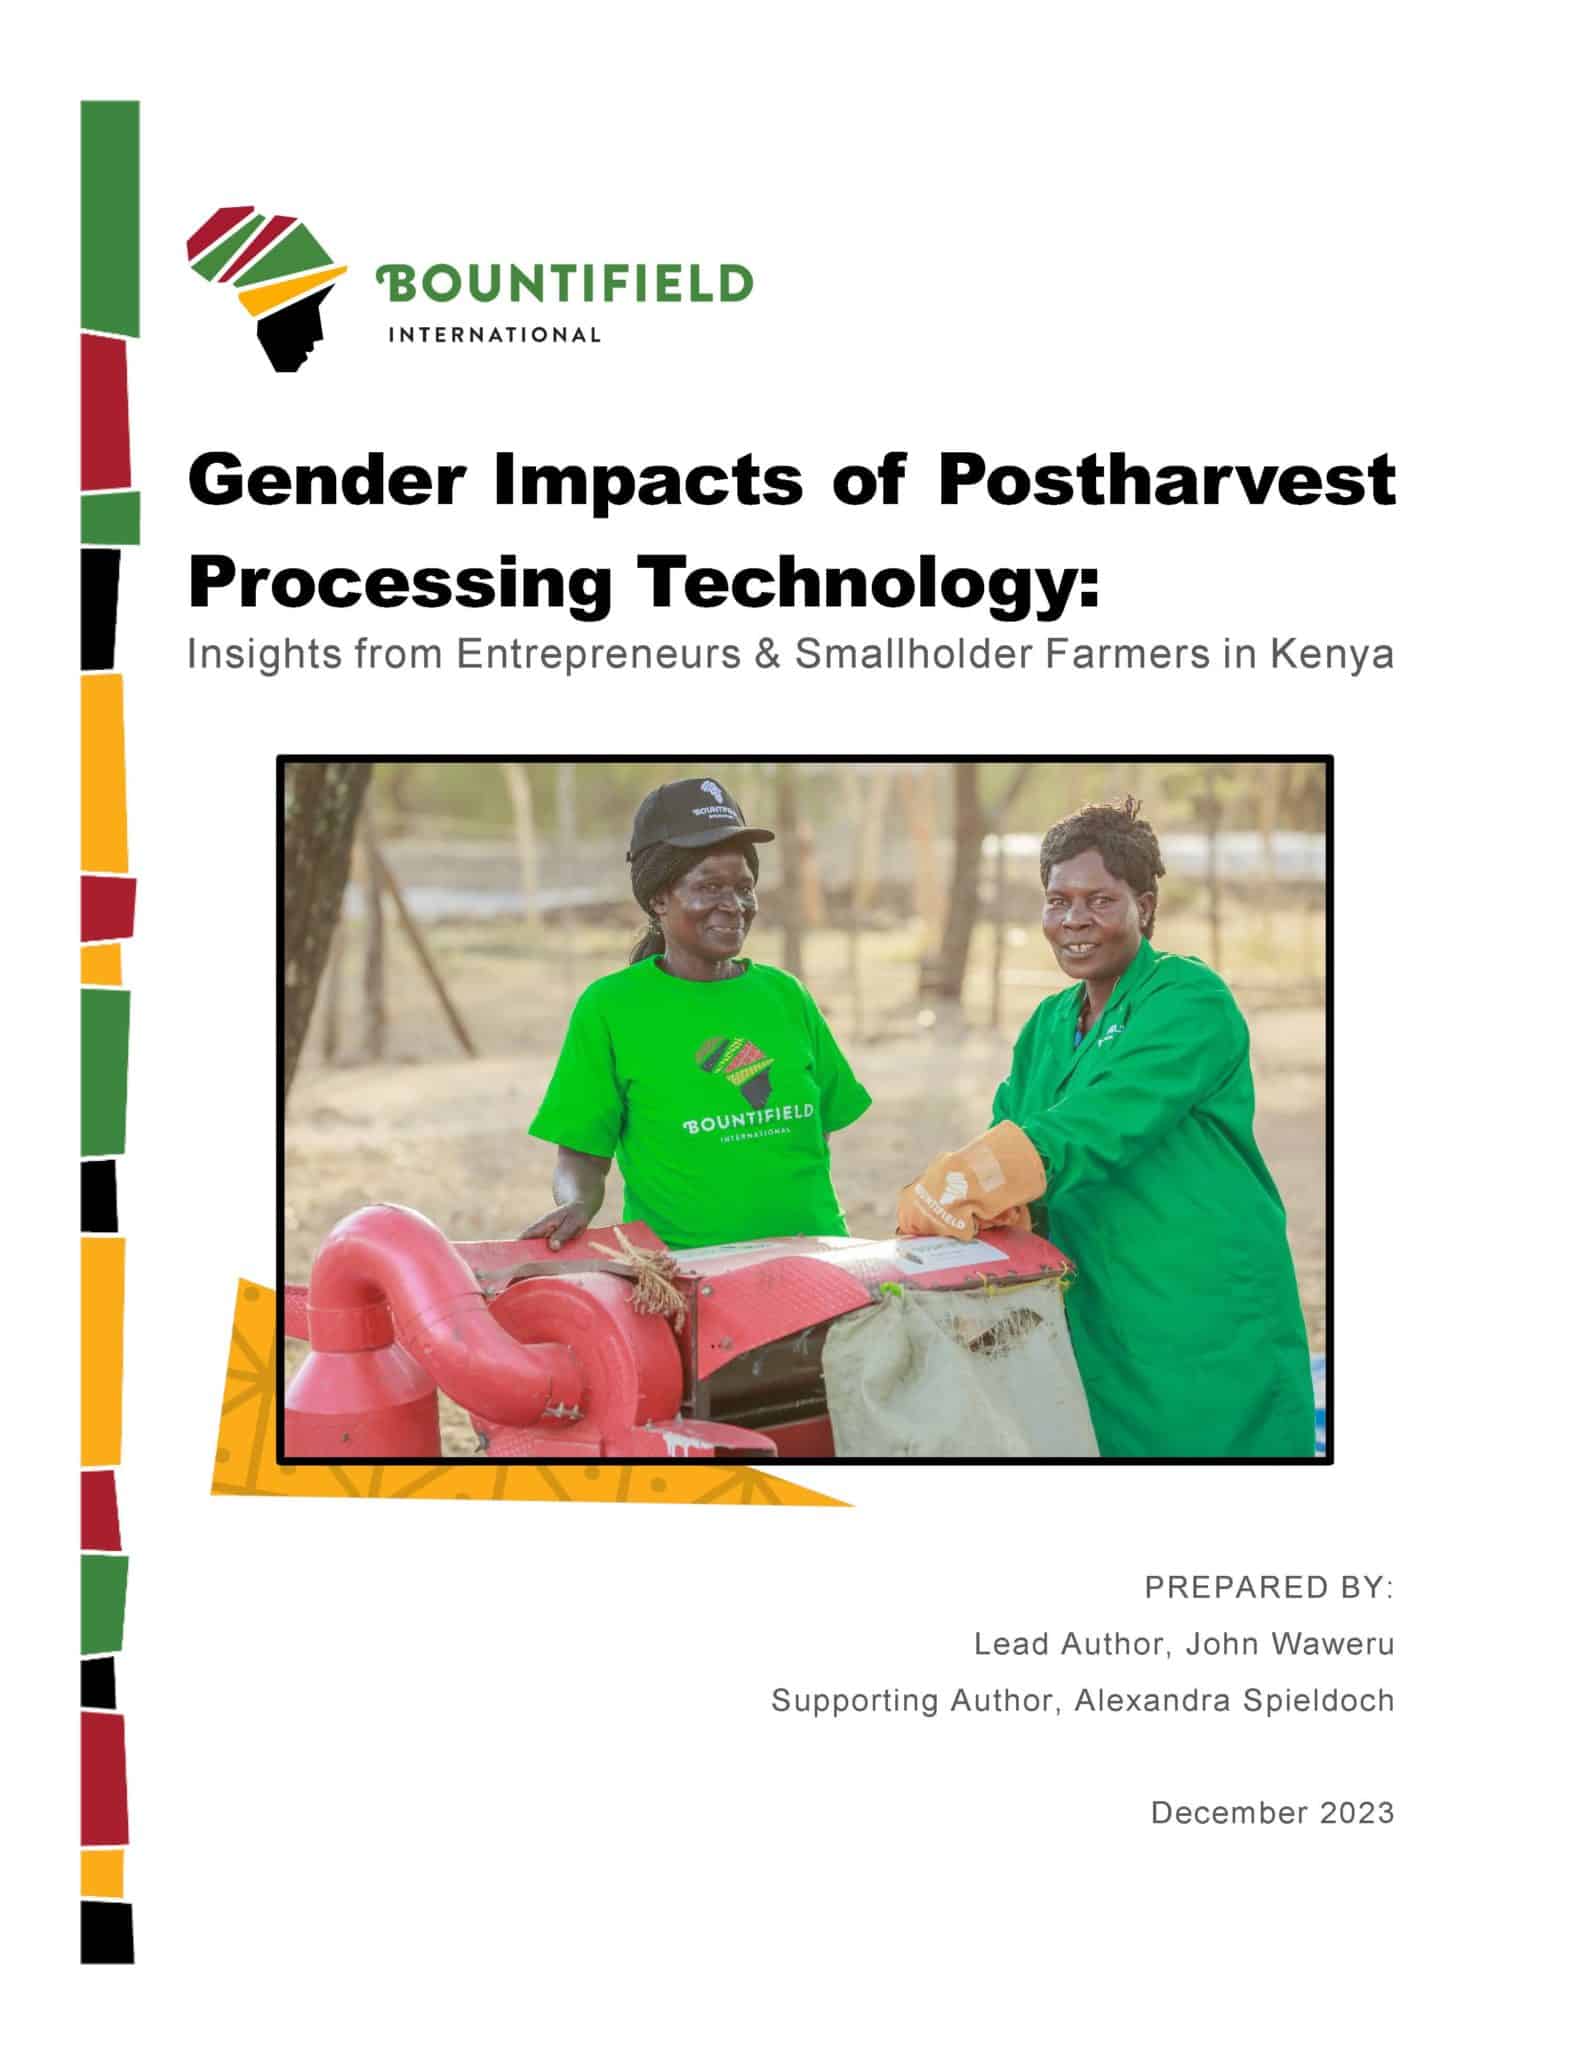 2023 Gender Impacts of Postharvest Processing Technology Report